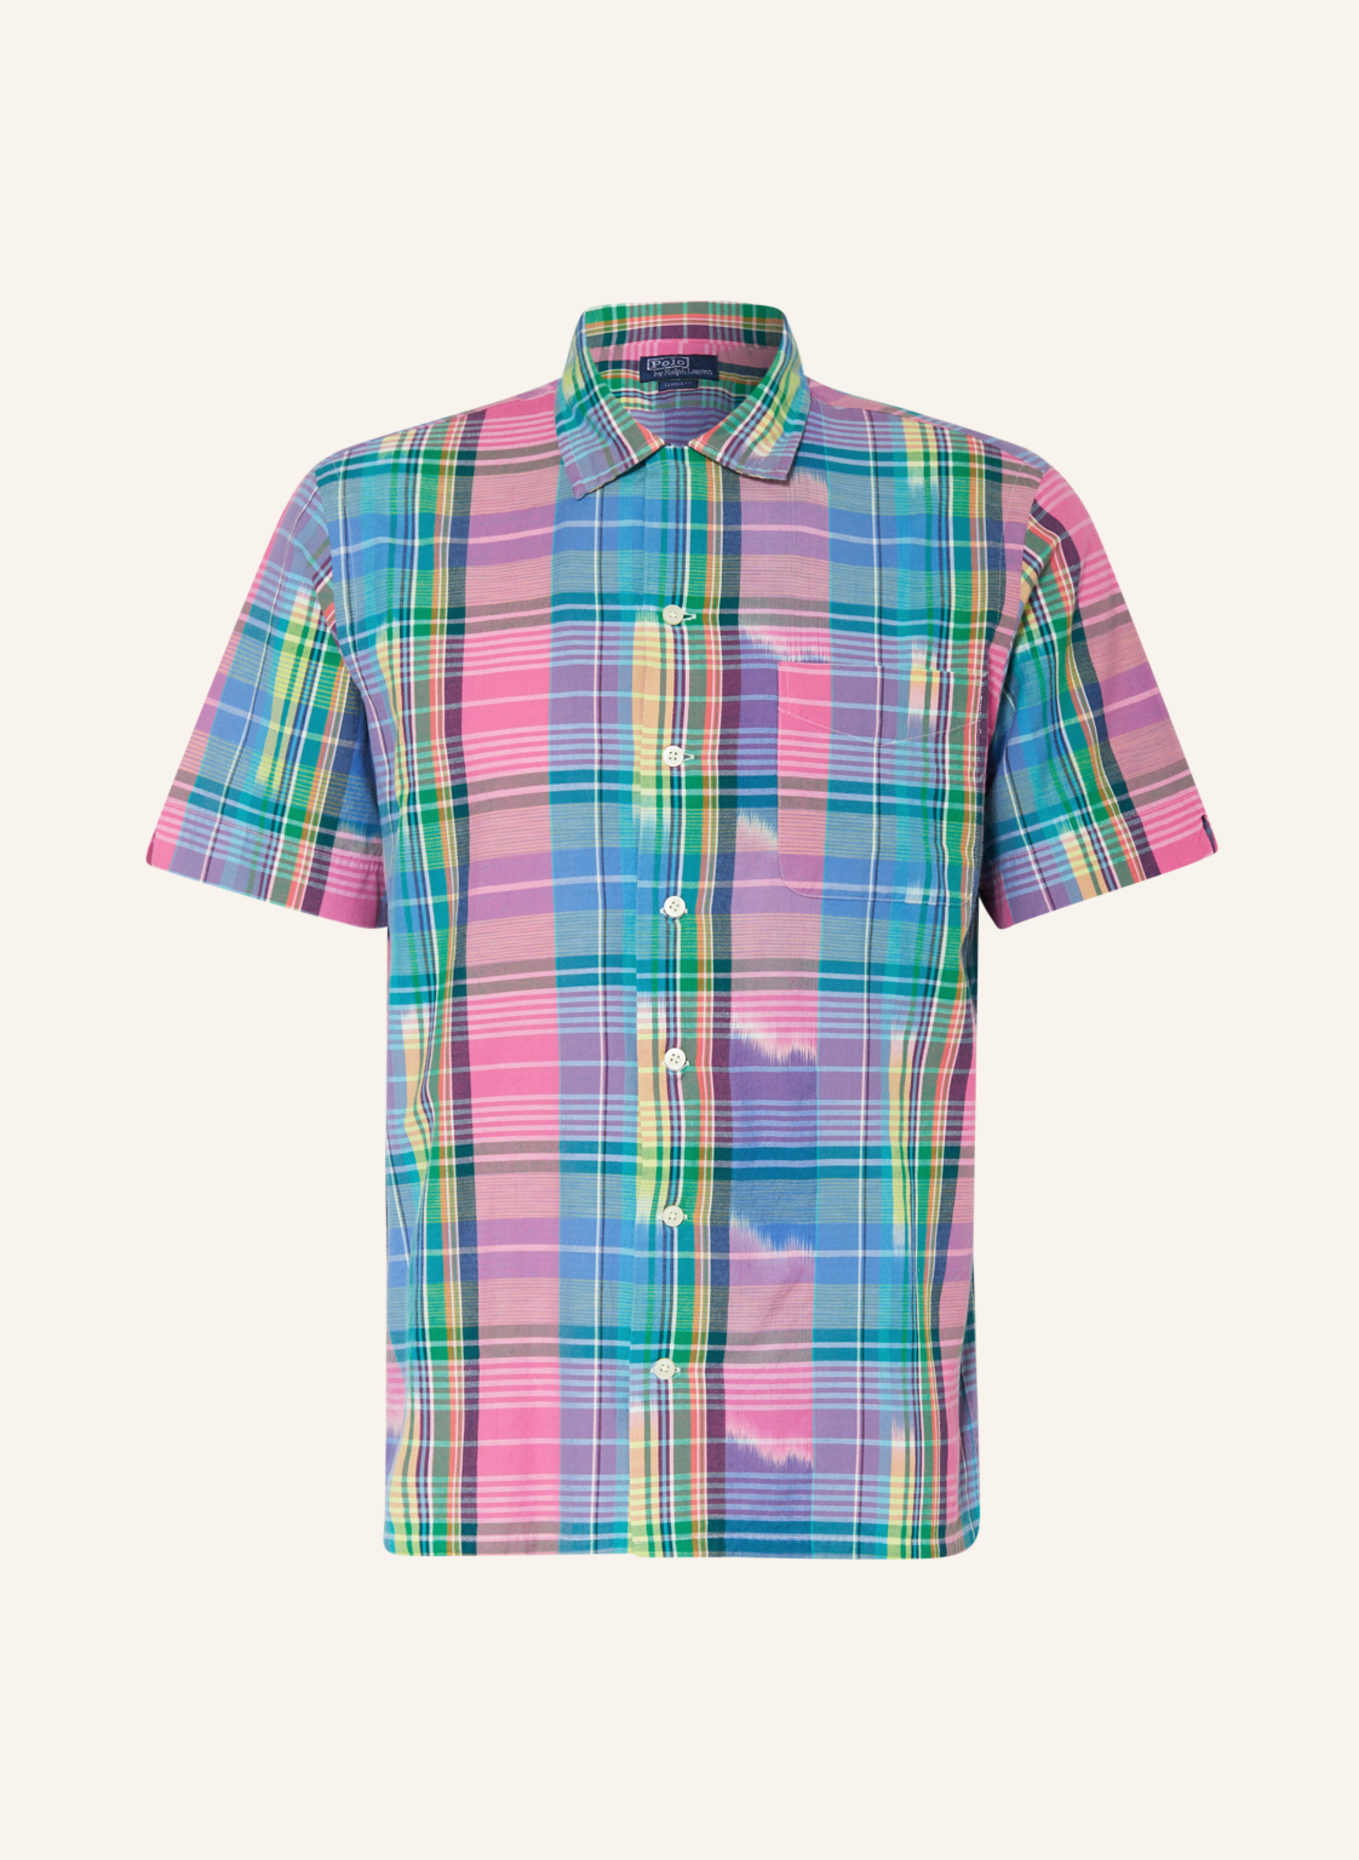 POLO RALPH LAUREN Short sleeve shirt MADRAS classic fit, Color: GREEN/ PINK/ BLUE (Image 1)